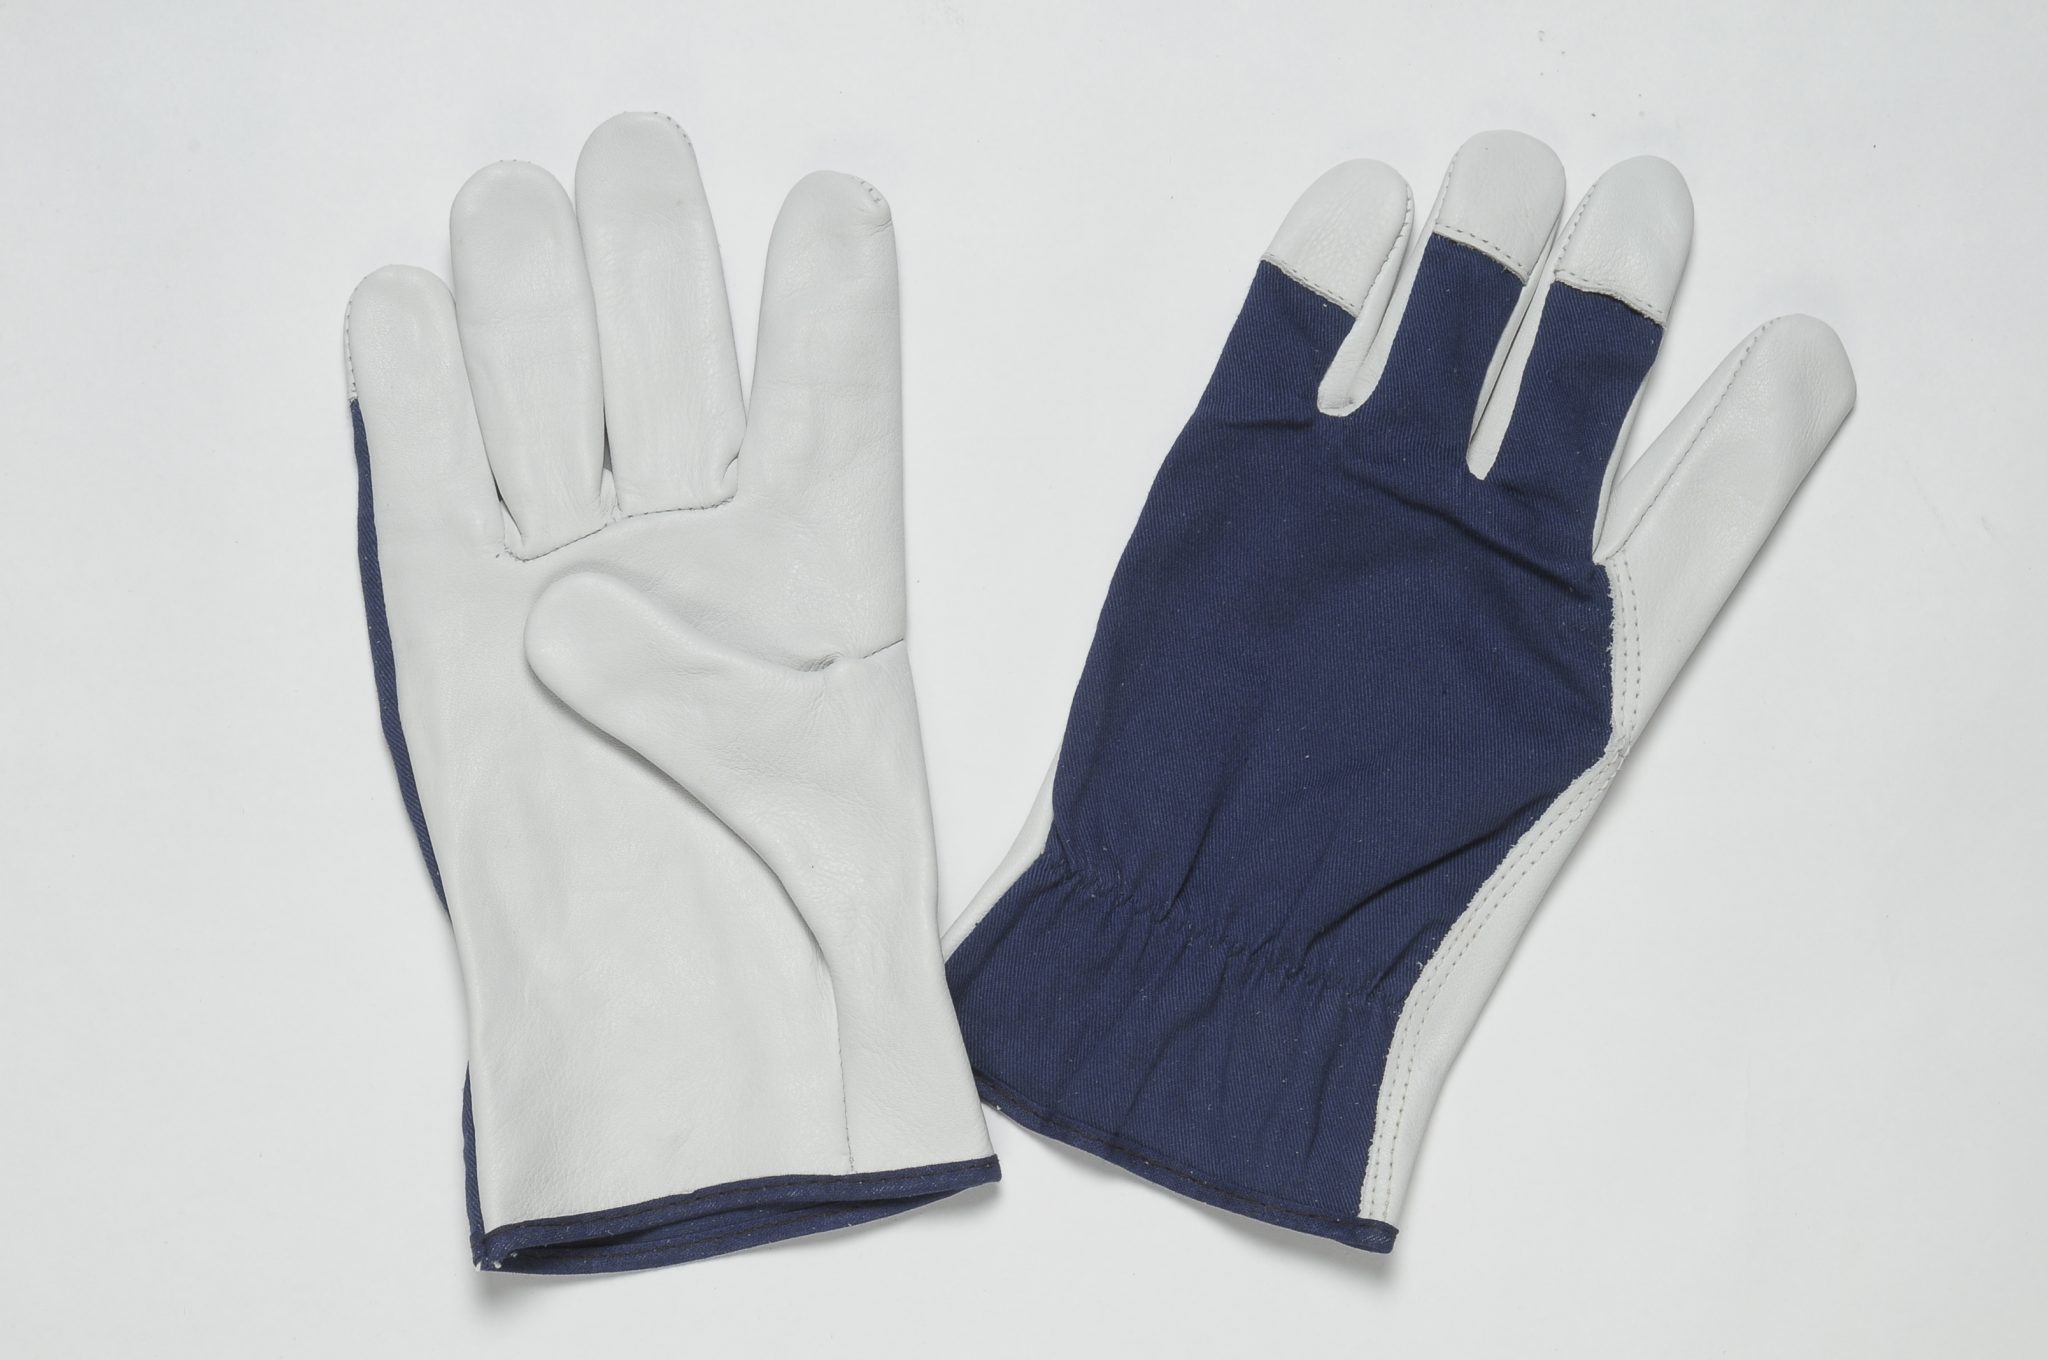 NATURAL LEATHER GLOVES WITH GRAIN O N PALM, THUMB AND FINGERTIPS, BACK WITH COTTON FABRIC, ADJUSTABLE ELASTIC IN THE WRIST, COLOURED BINDING